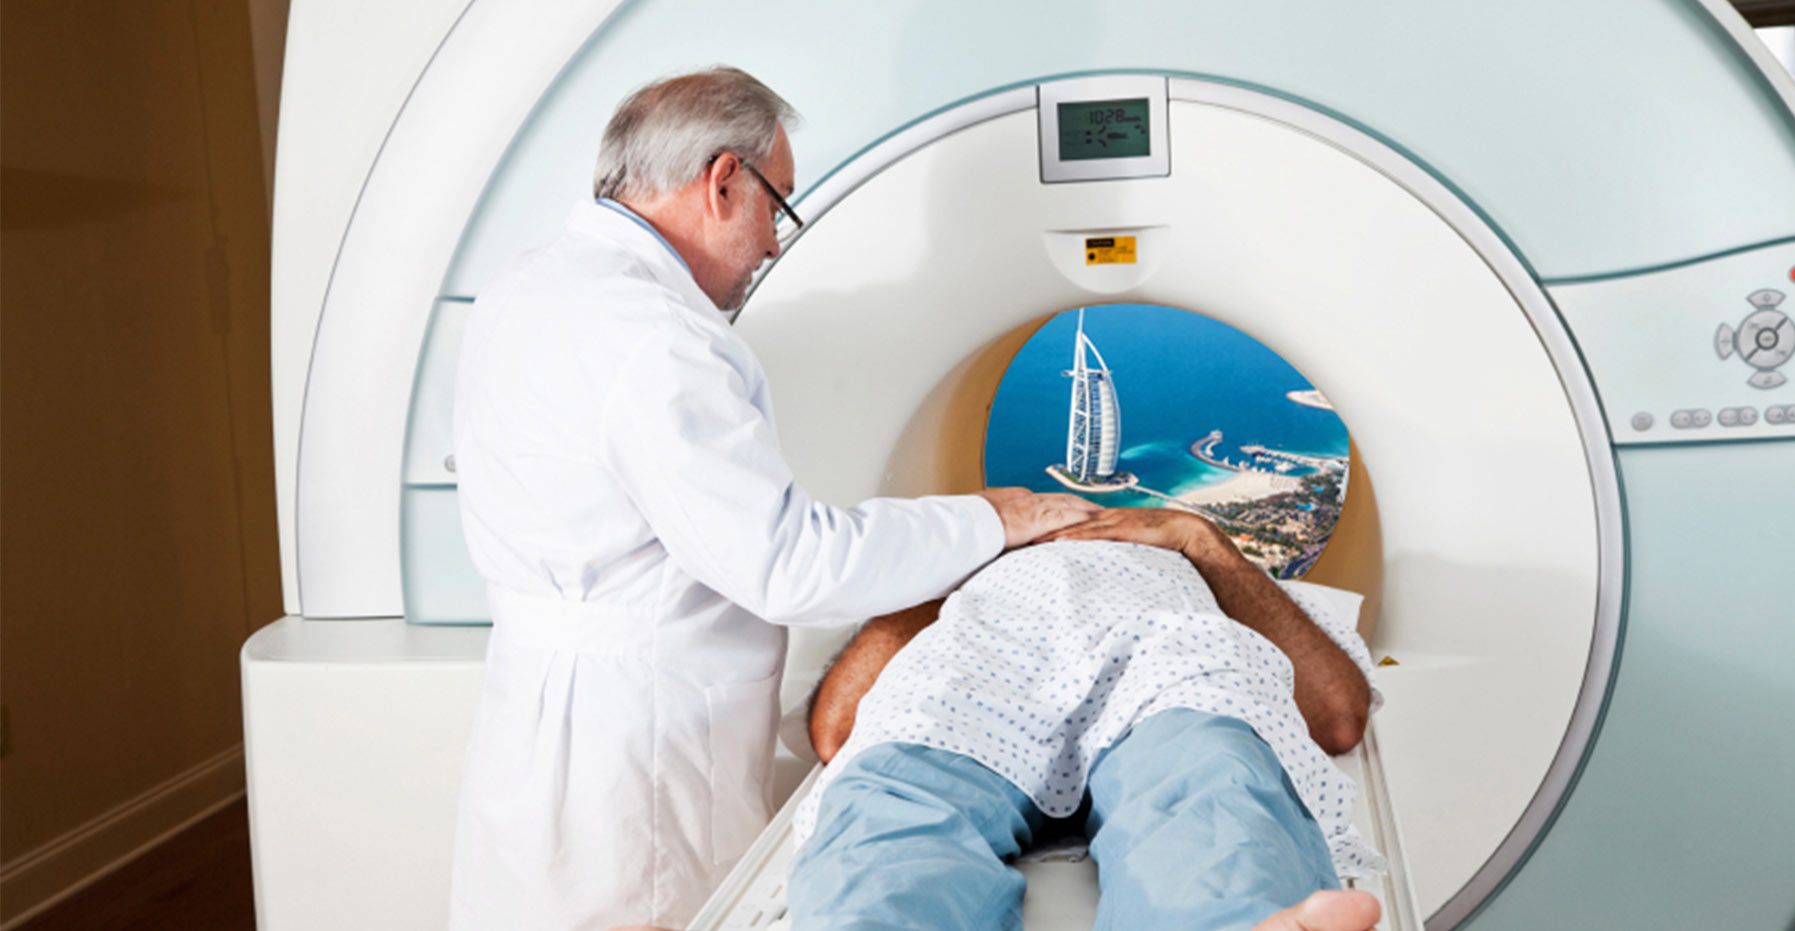 Watch movies while having an MRI scan